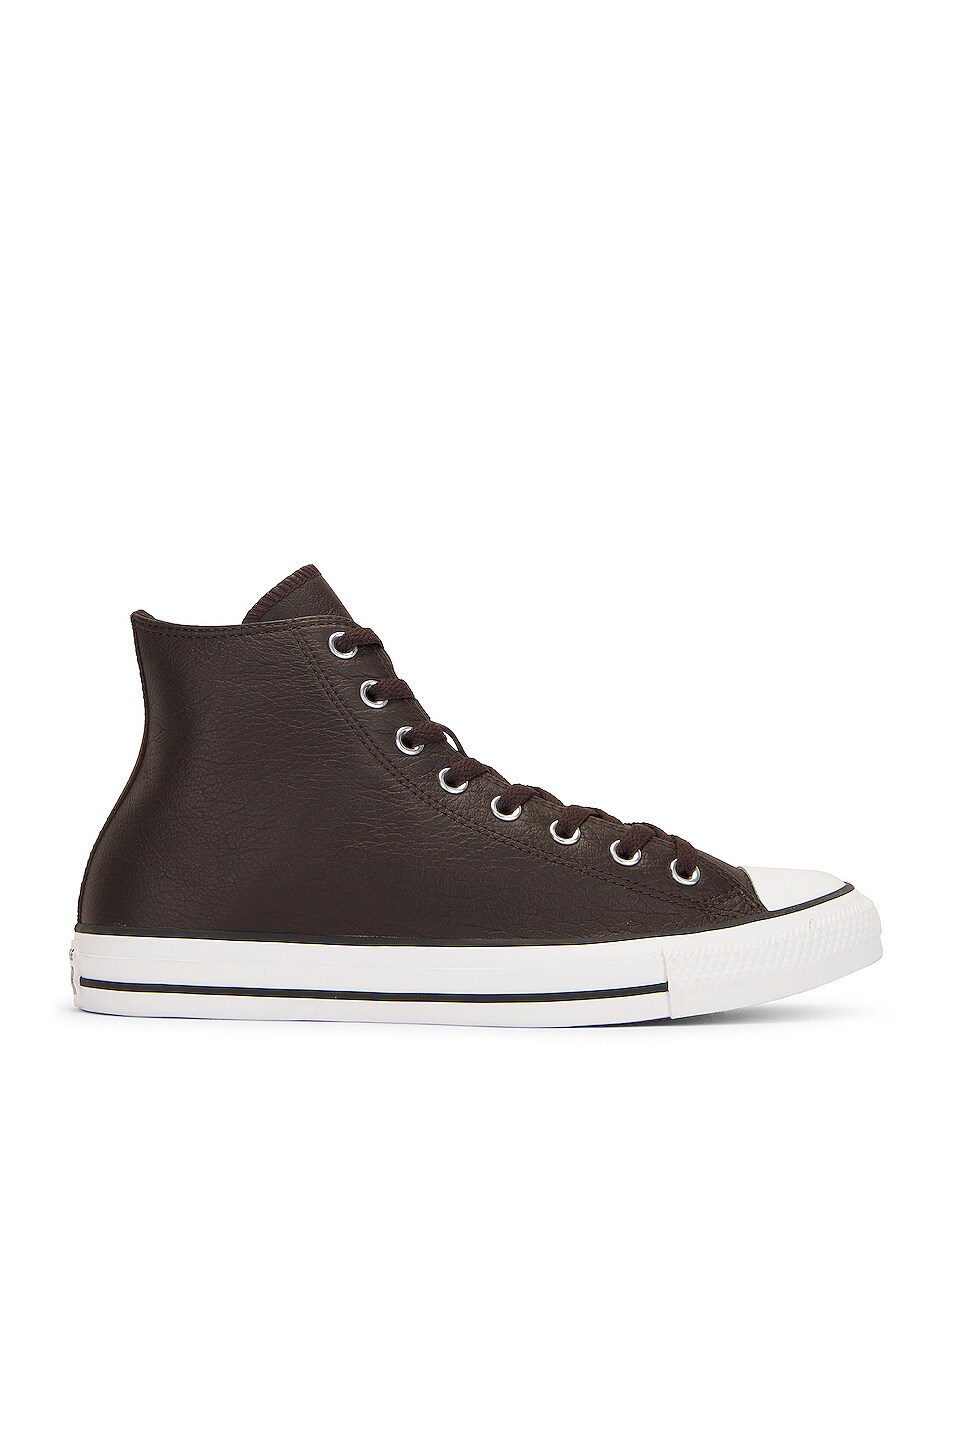 Image 1 of Converse Chuck Taylor All Star Tumbled Leather in Velvet Brown & White